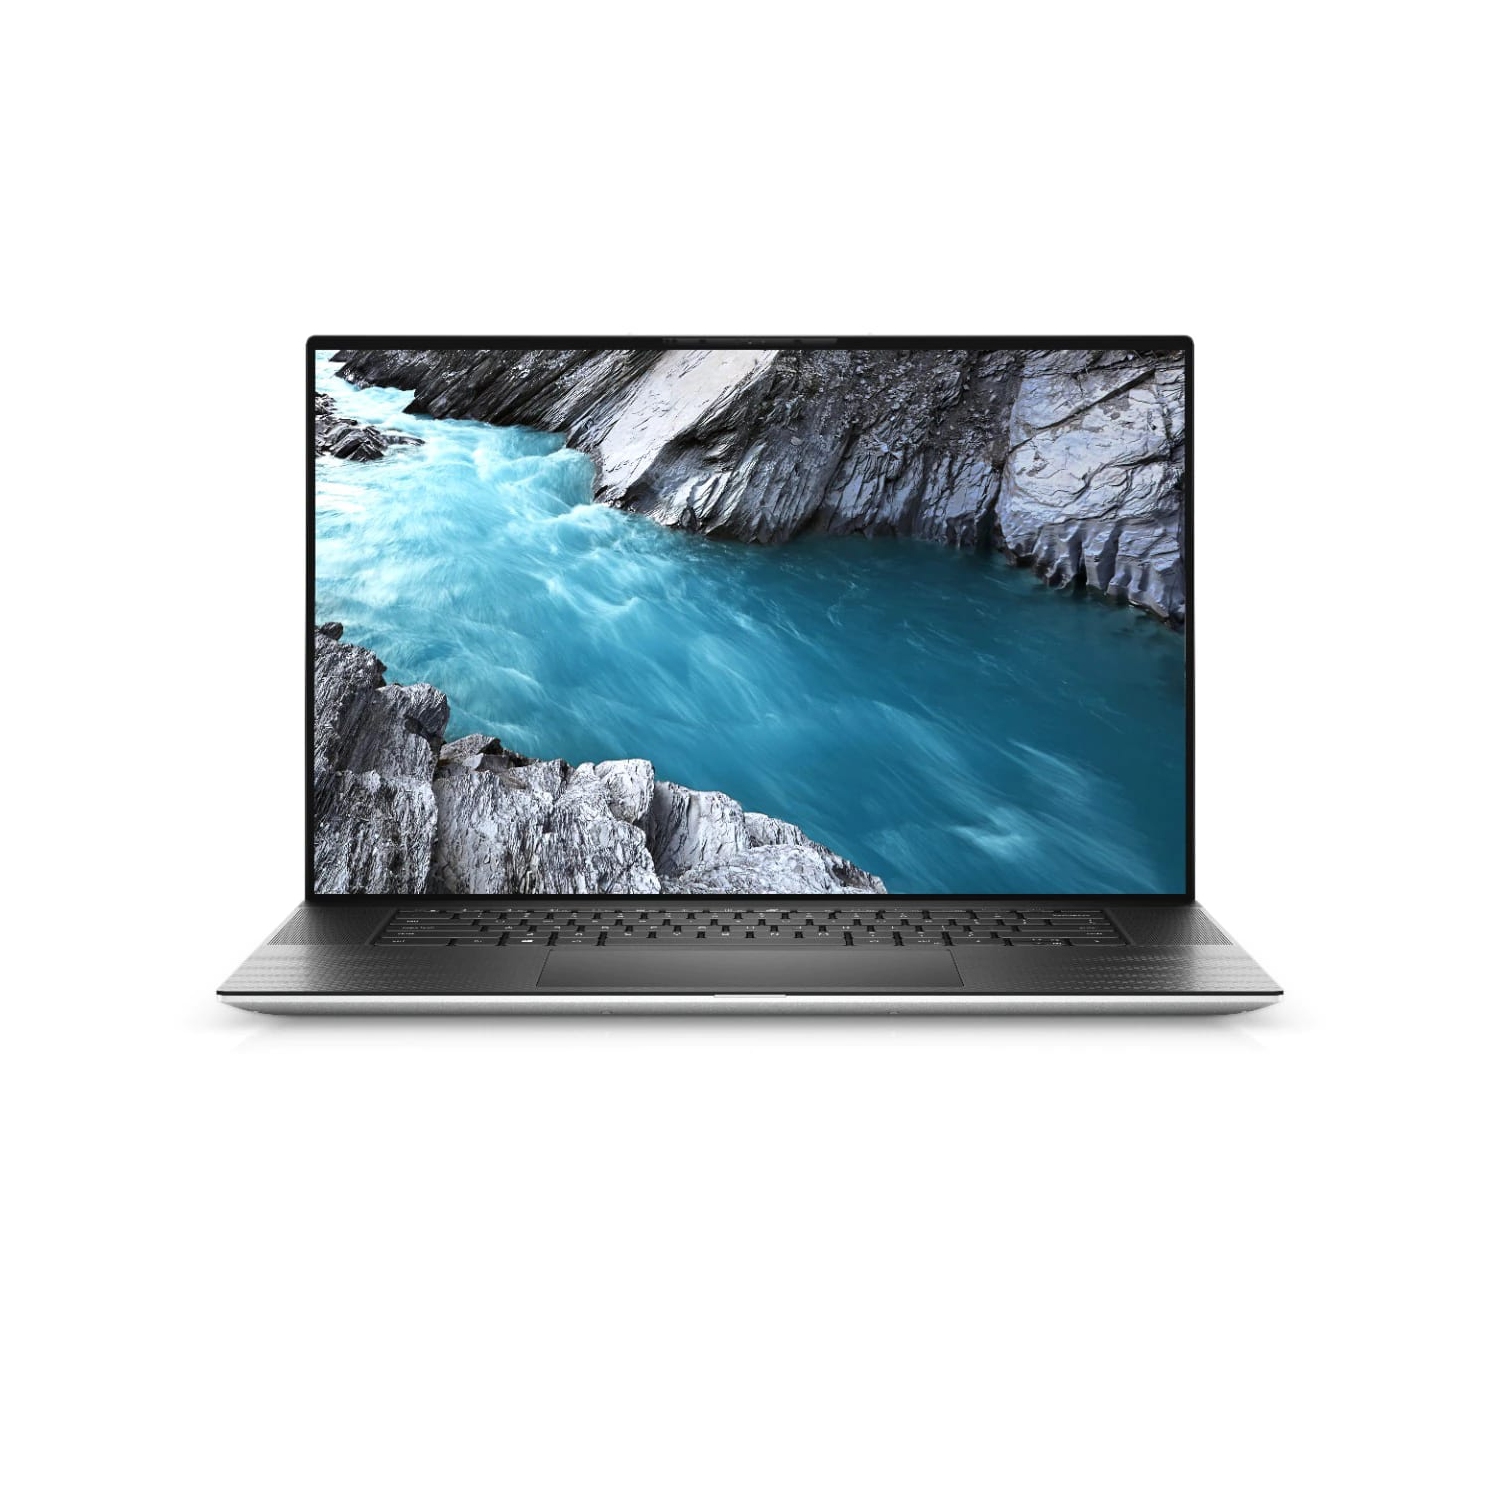 Refurbished (Excellent) - Dell XPS 17 9700 Laptop (2020) | 17" FHD+ | Core i7 - 512GB SSD - 32GB RAM - RTX 2060 | 8 Cores @ 5.1 GHz - 10th Gen CPU Certified Refurbished